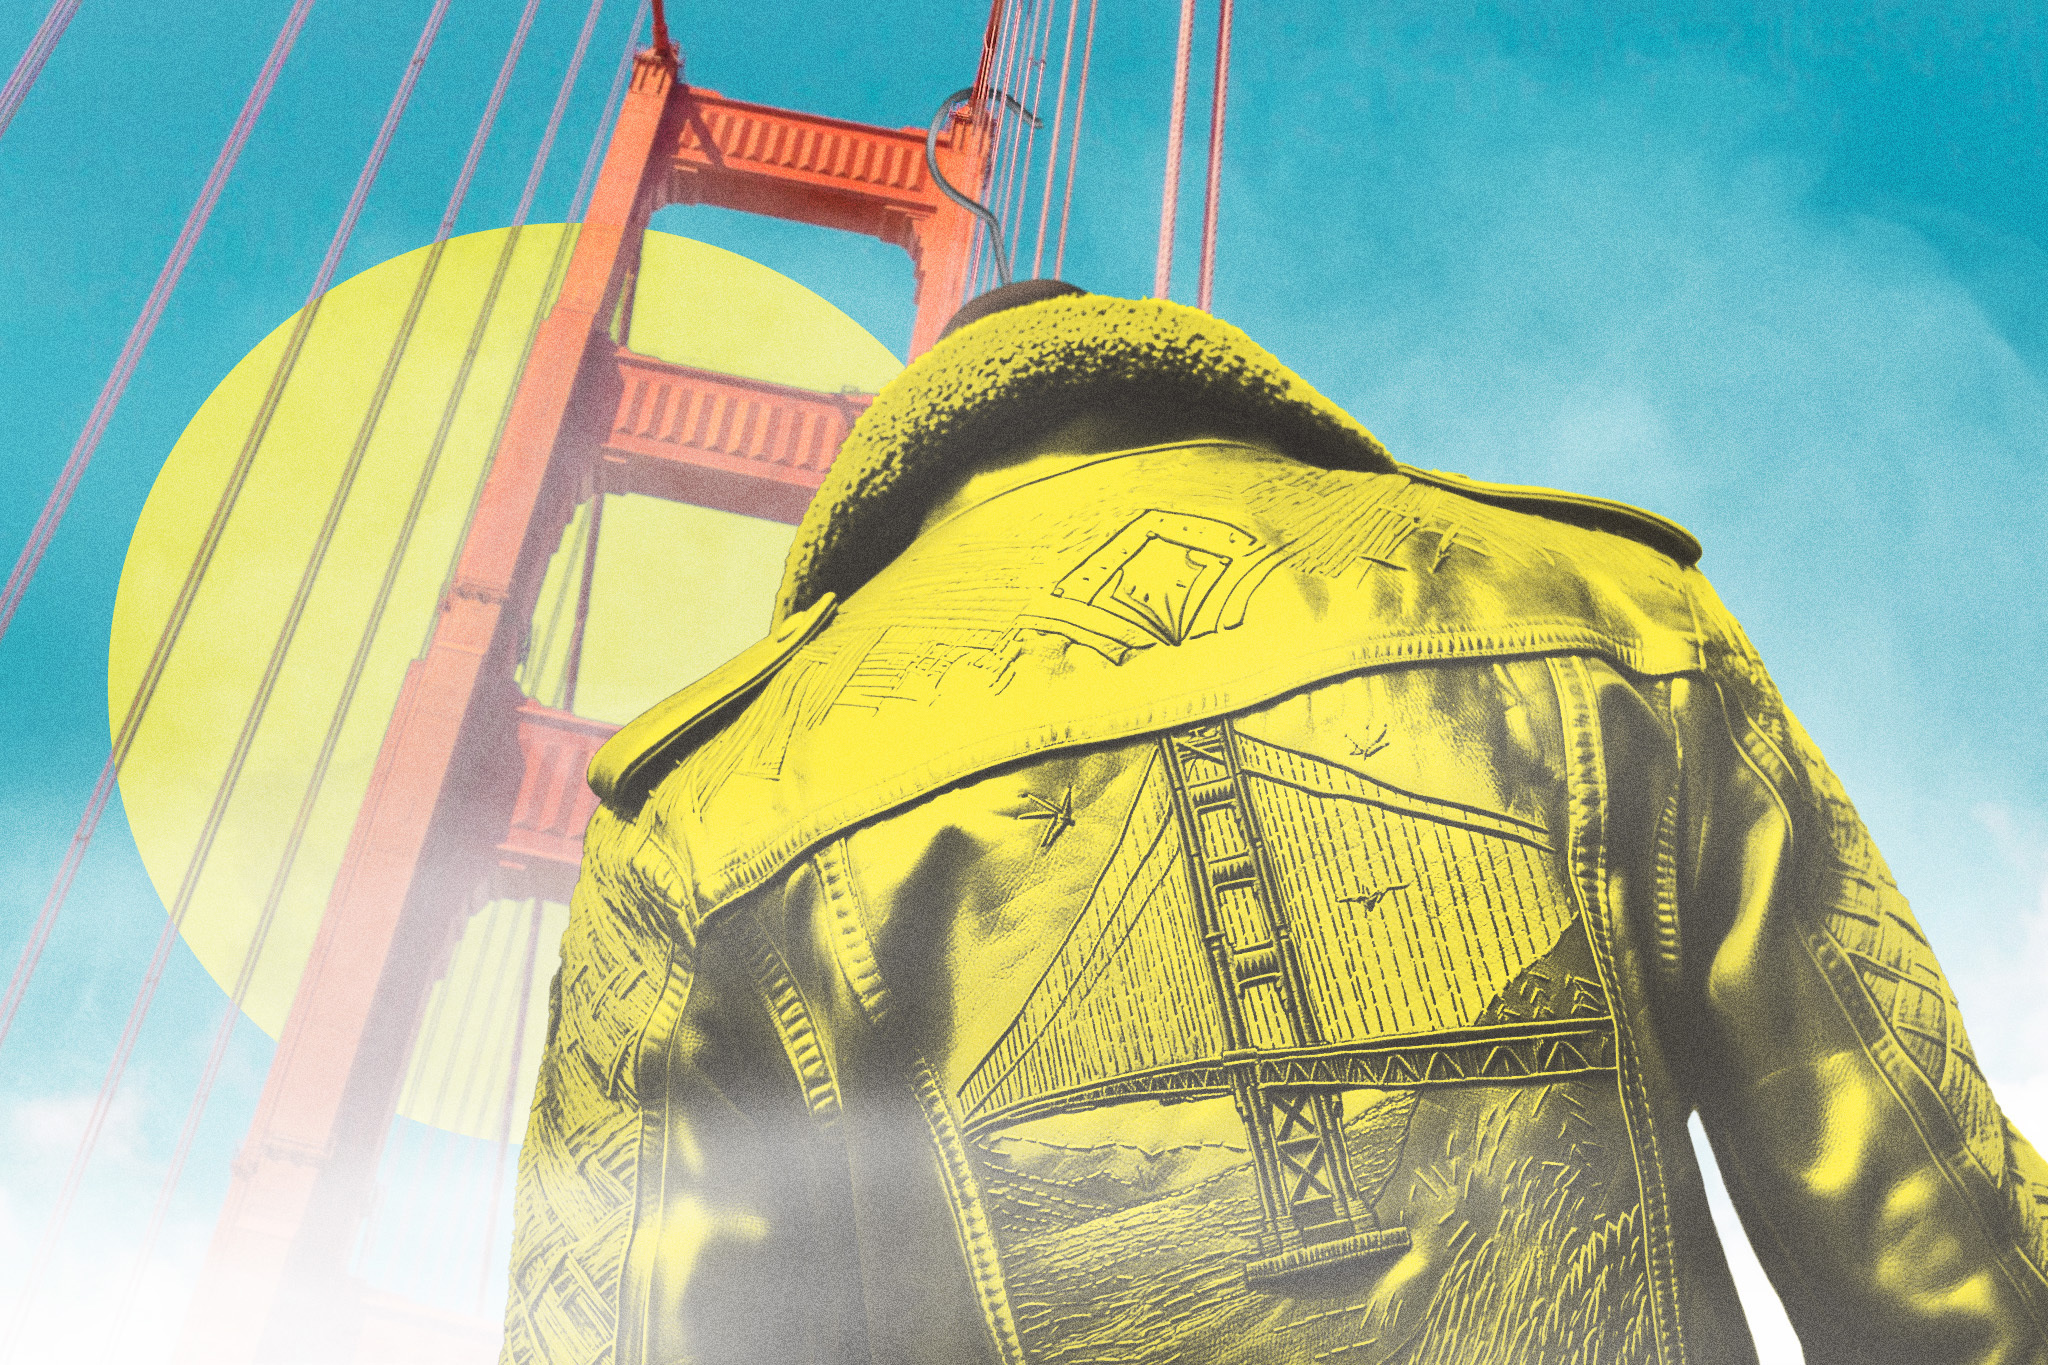 A person in a yellow leather jacket gazes at the Golden Gate Bridge under a teal sky with a bright sun.